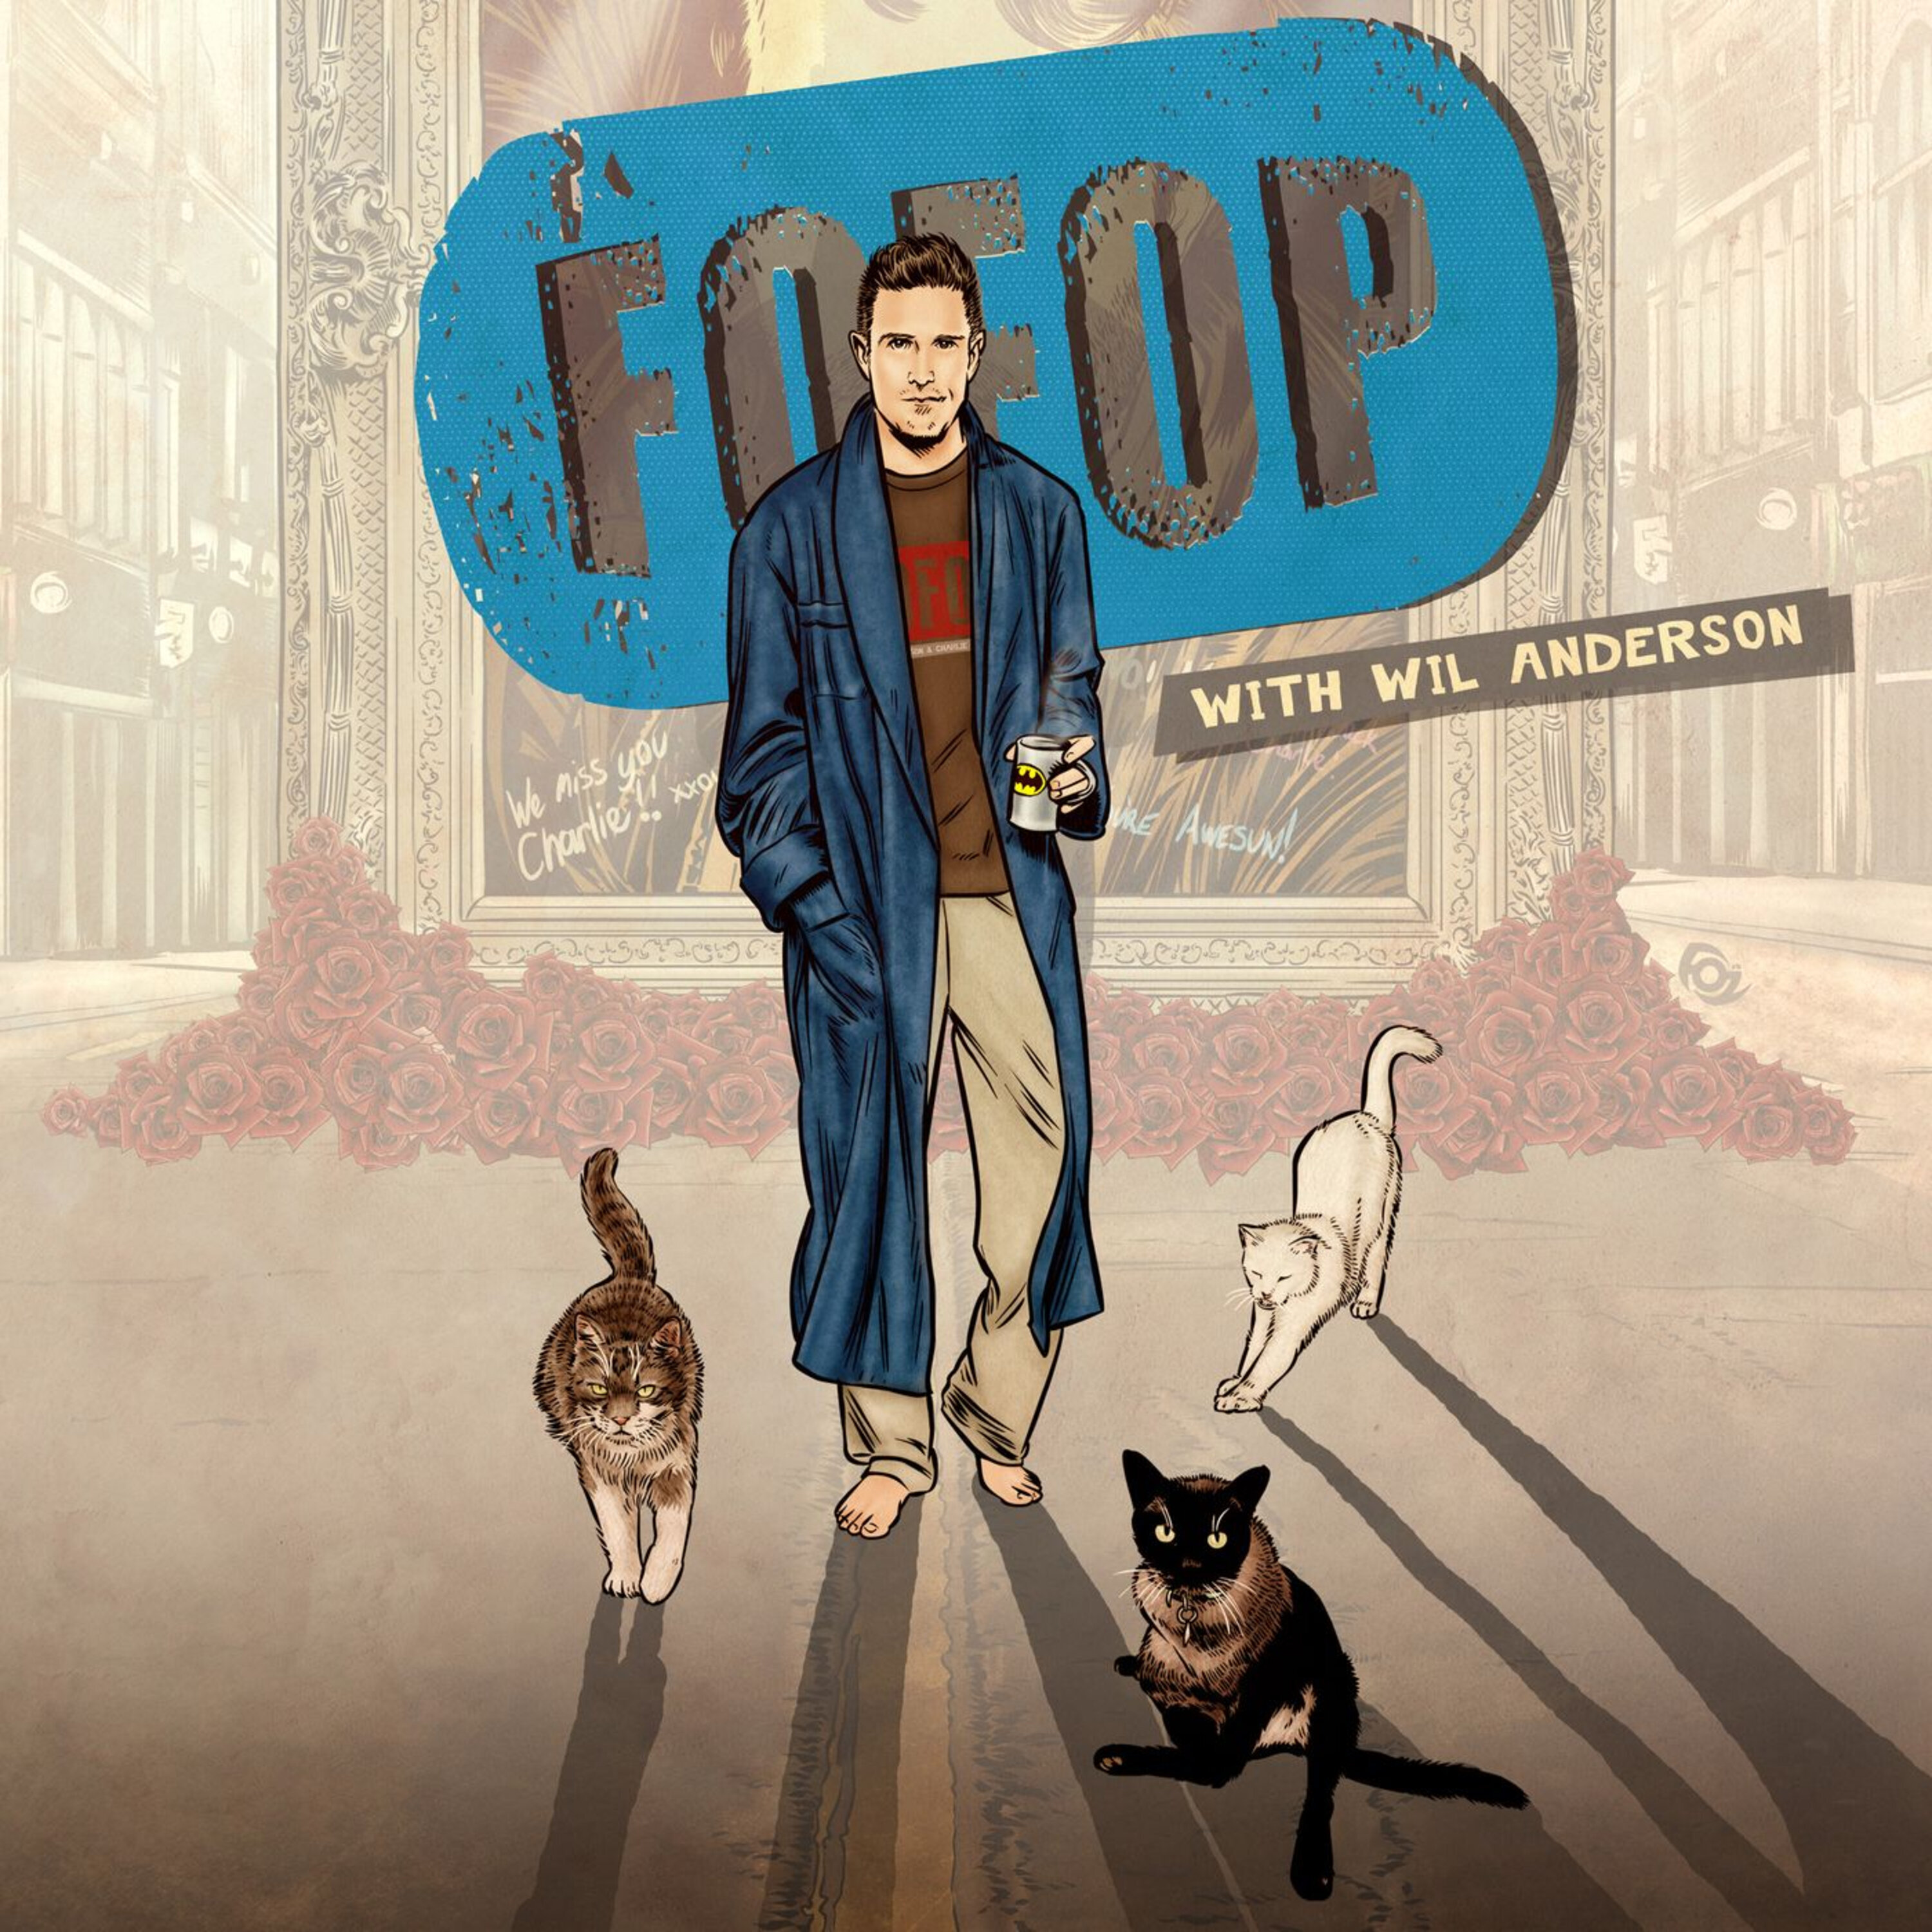 FOFOP 229- The Healing Comedy Of